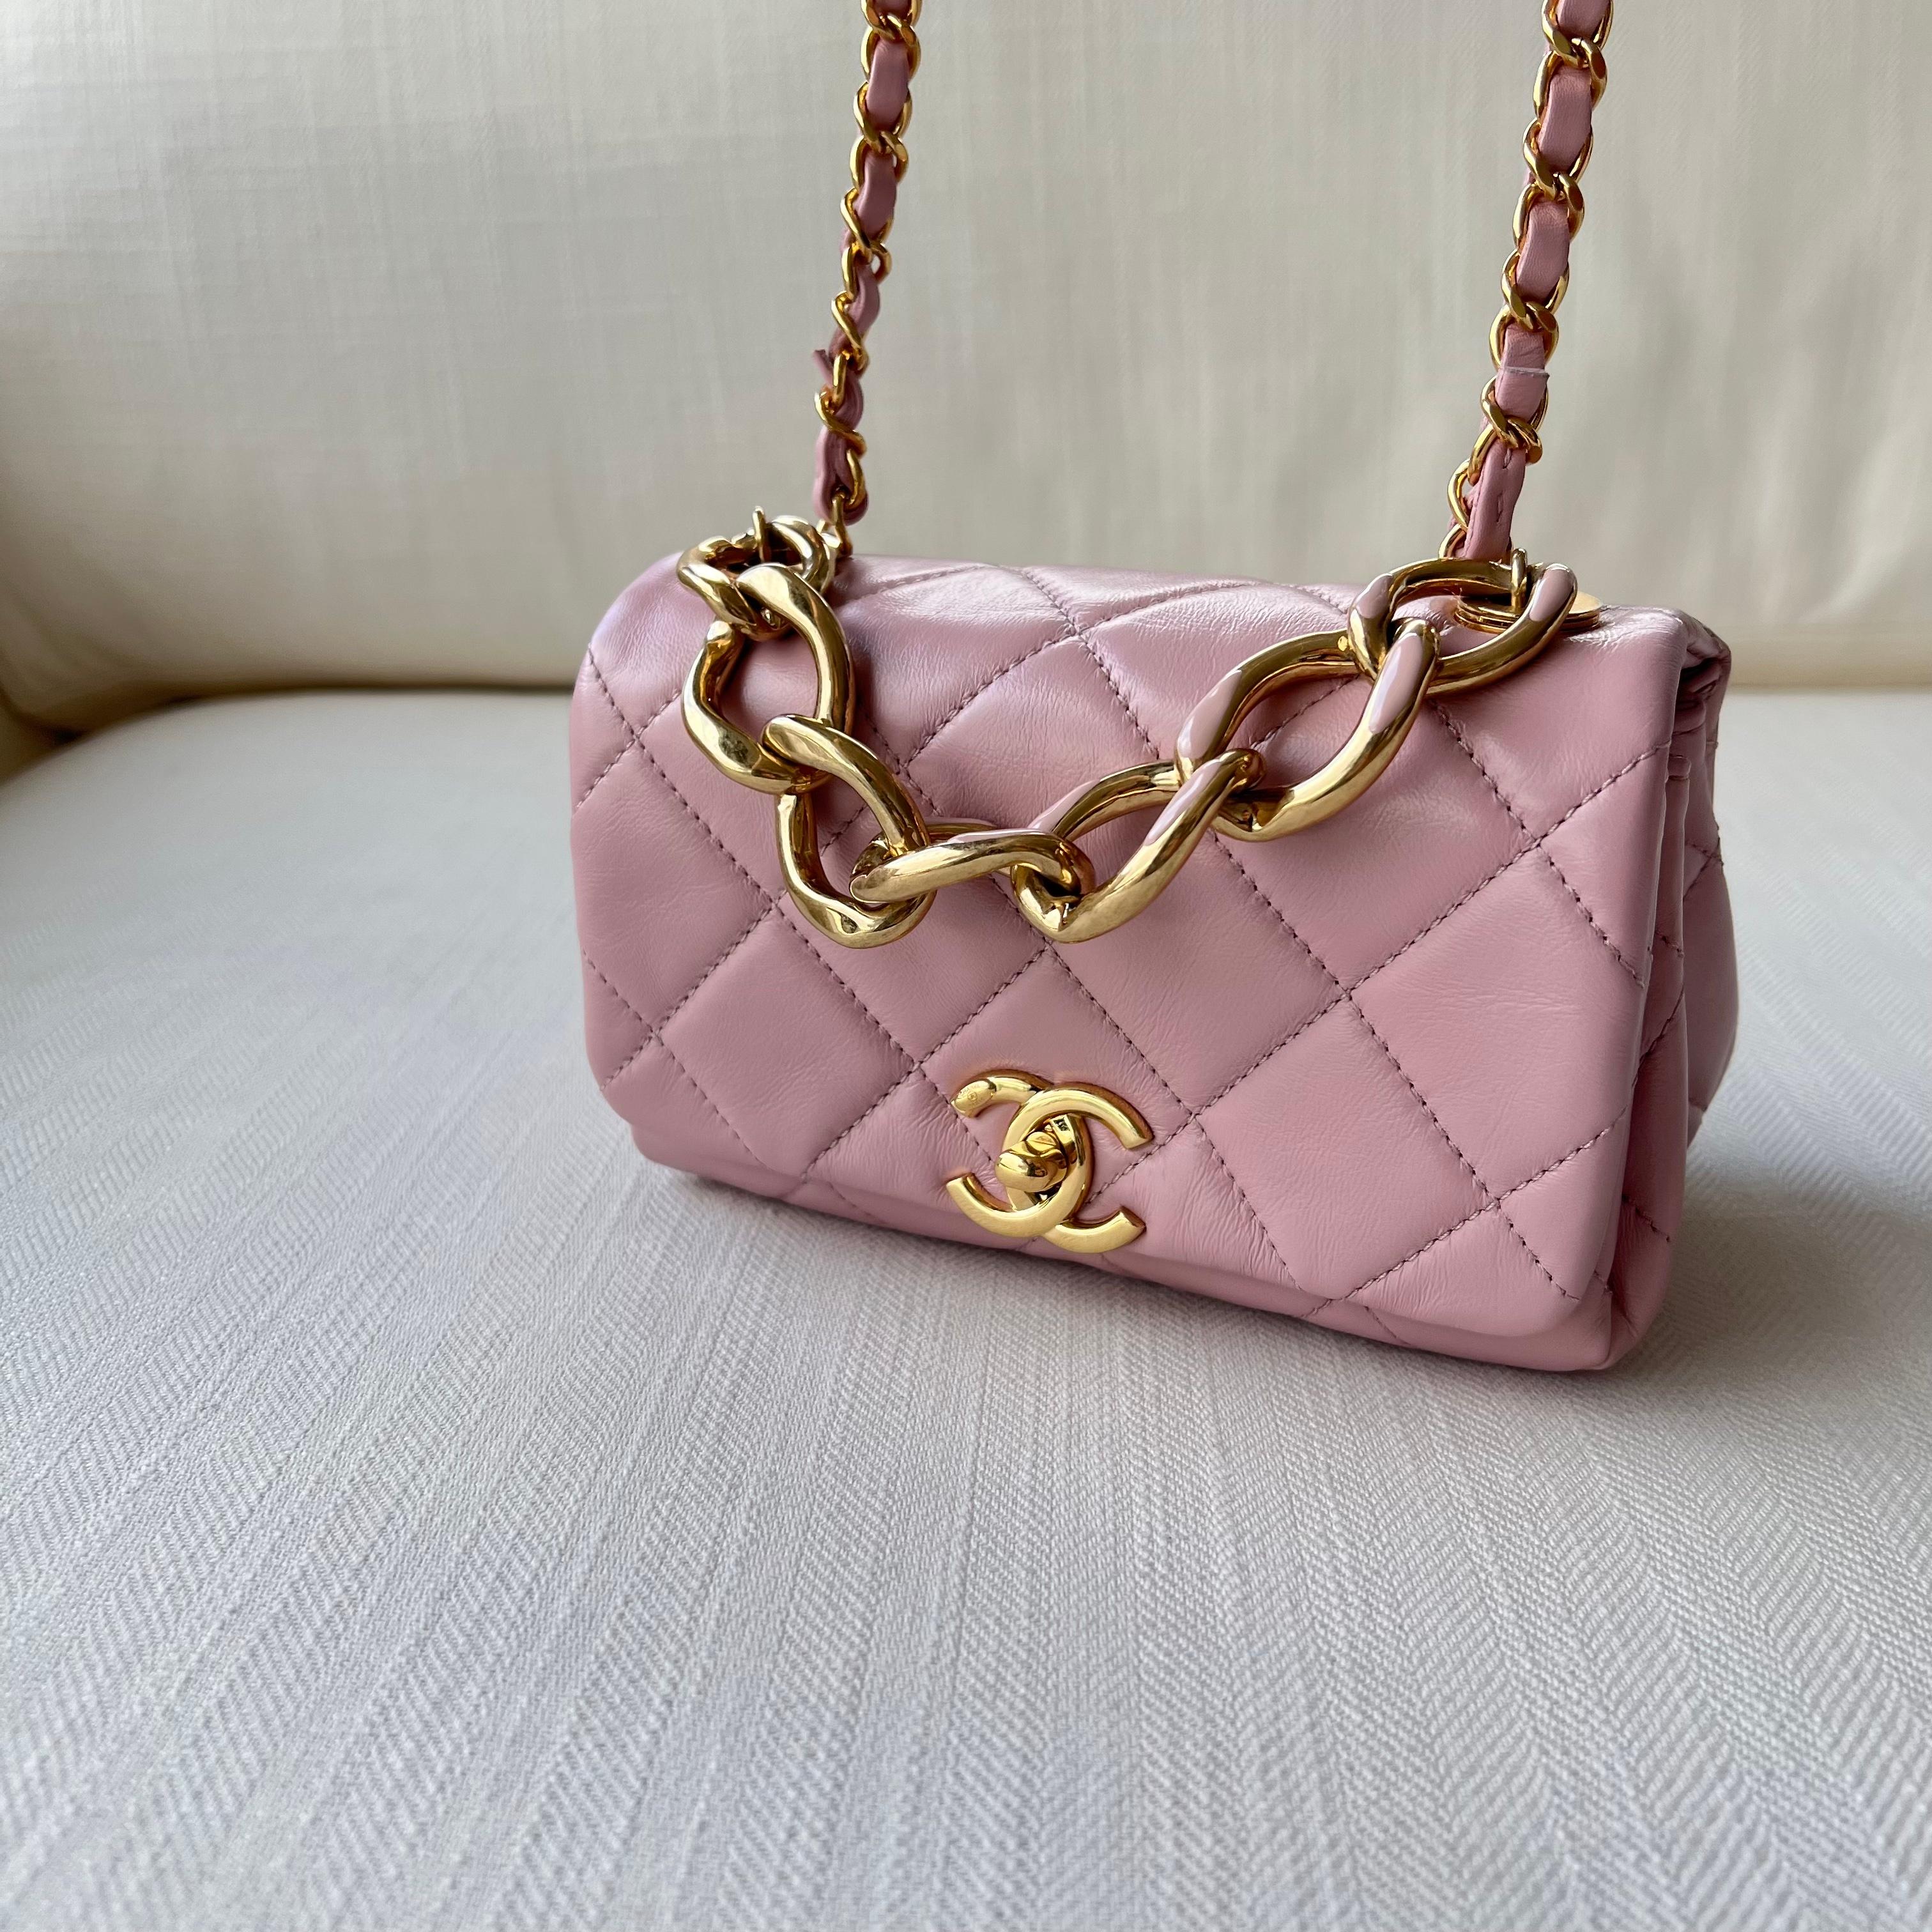 This is a beautiful dusty pink Chanel bag from 2022. The hardware is gold plated. 

Bag: Chanel 22A Mini Flap Bag
Colour Code: N1681

Condition: Brand New. With original packaging and receipt. 